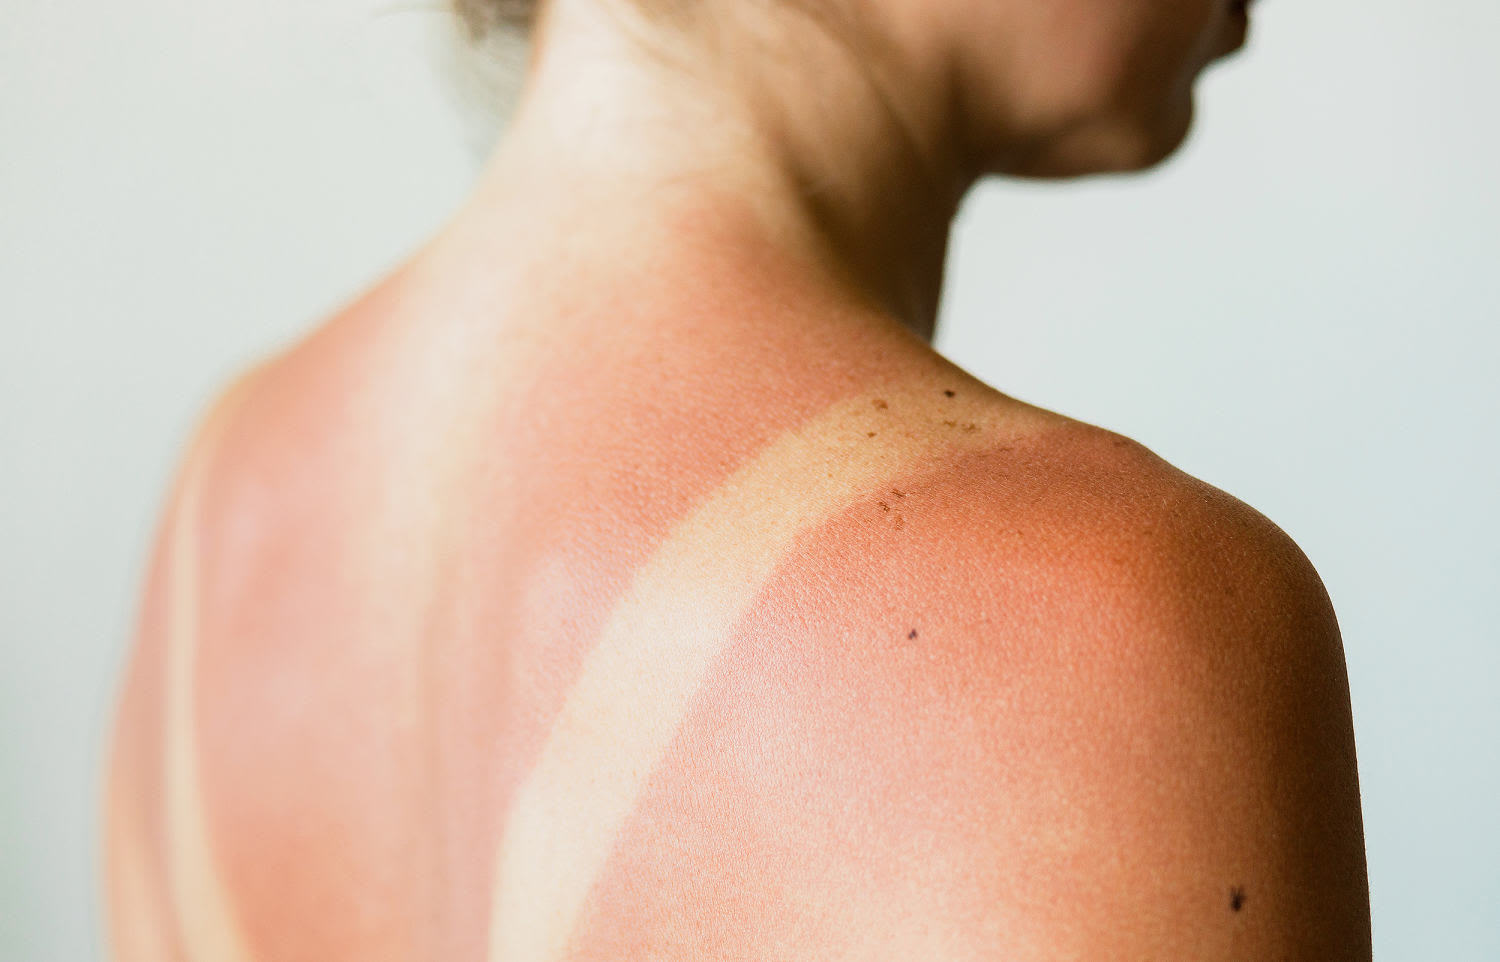 Do you have heat rash or sun poisoning? Look for these important differences, derms say